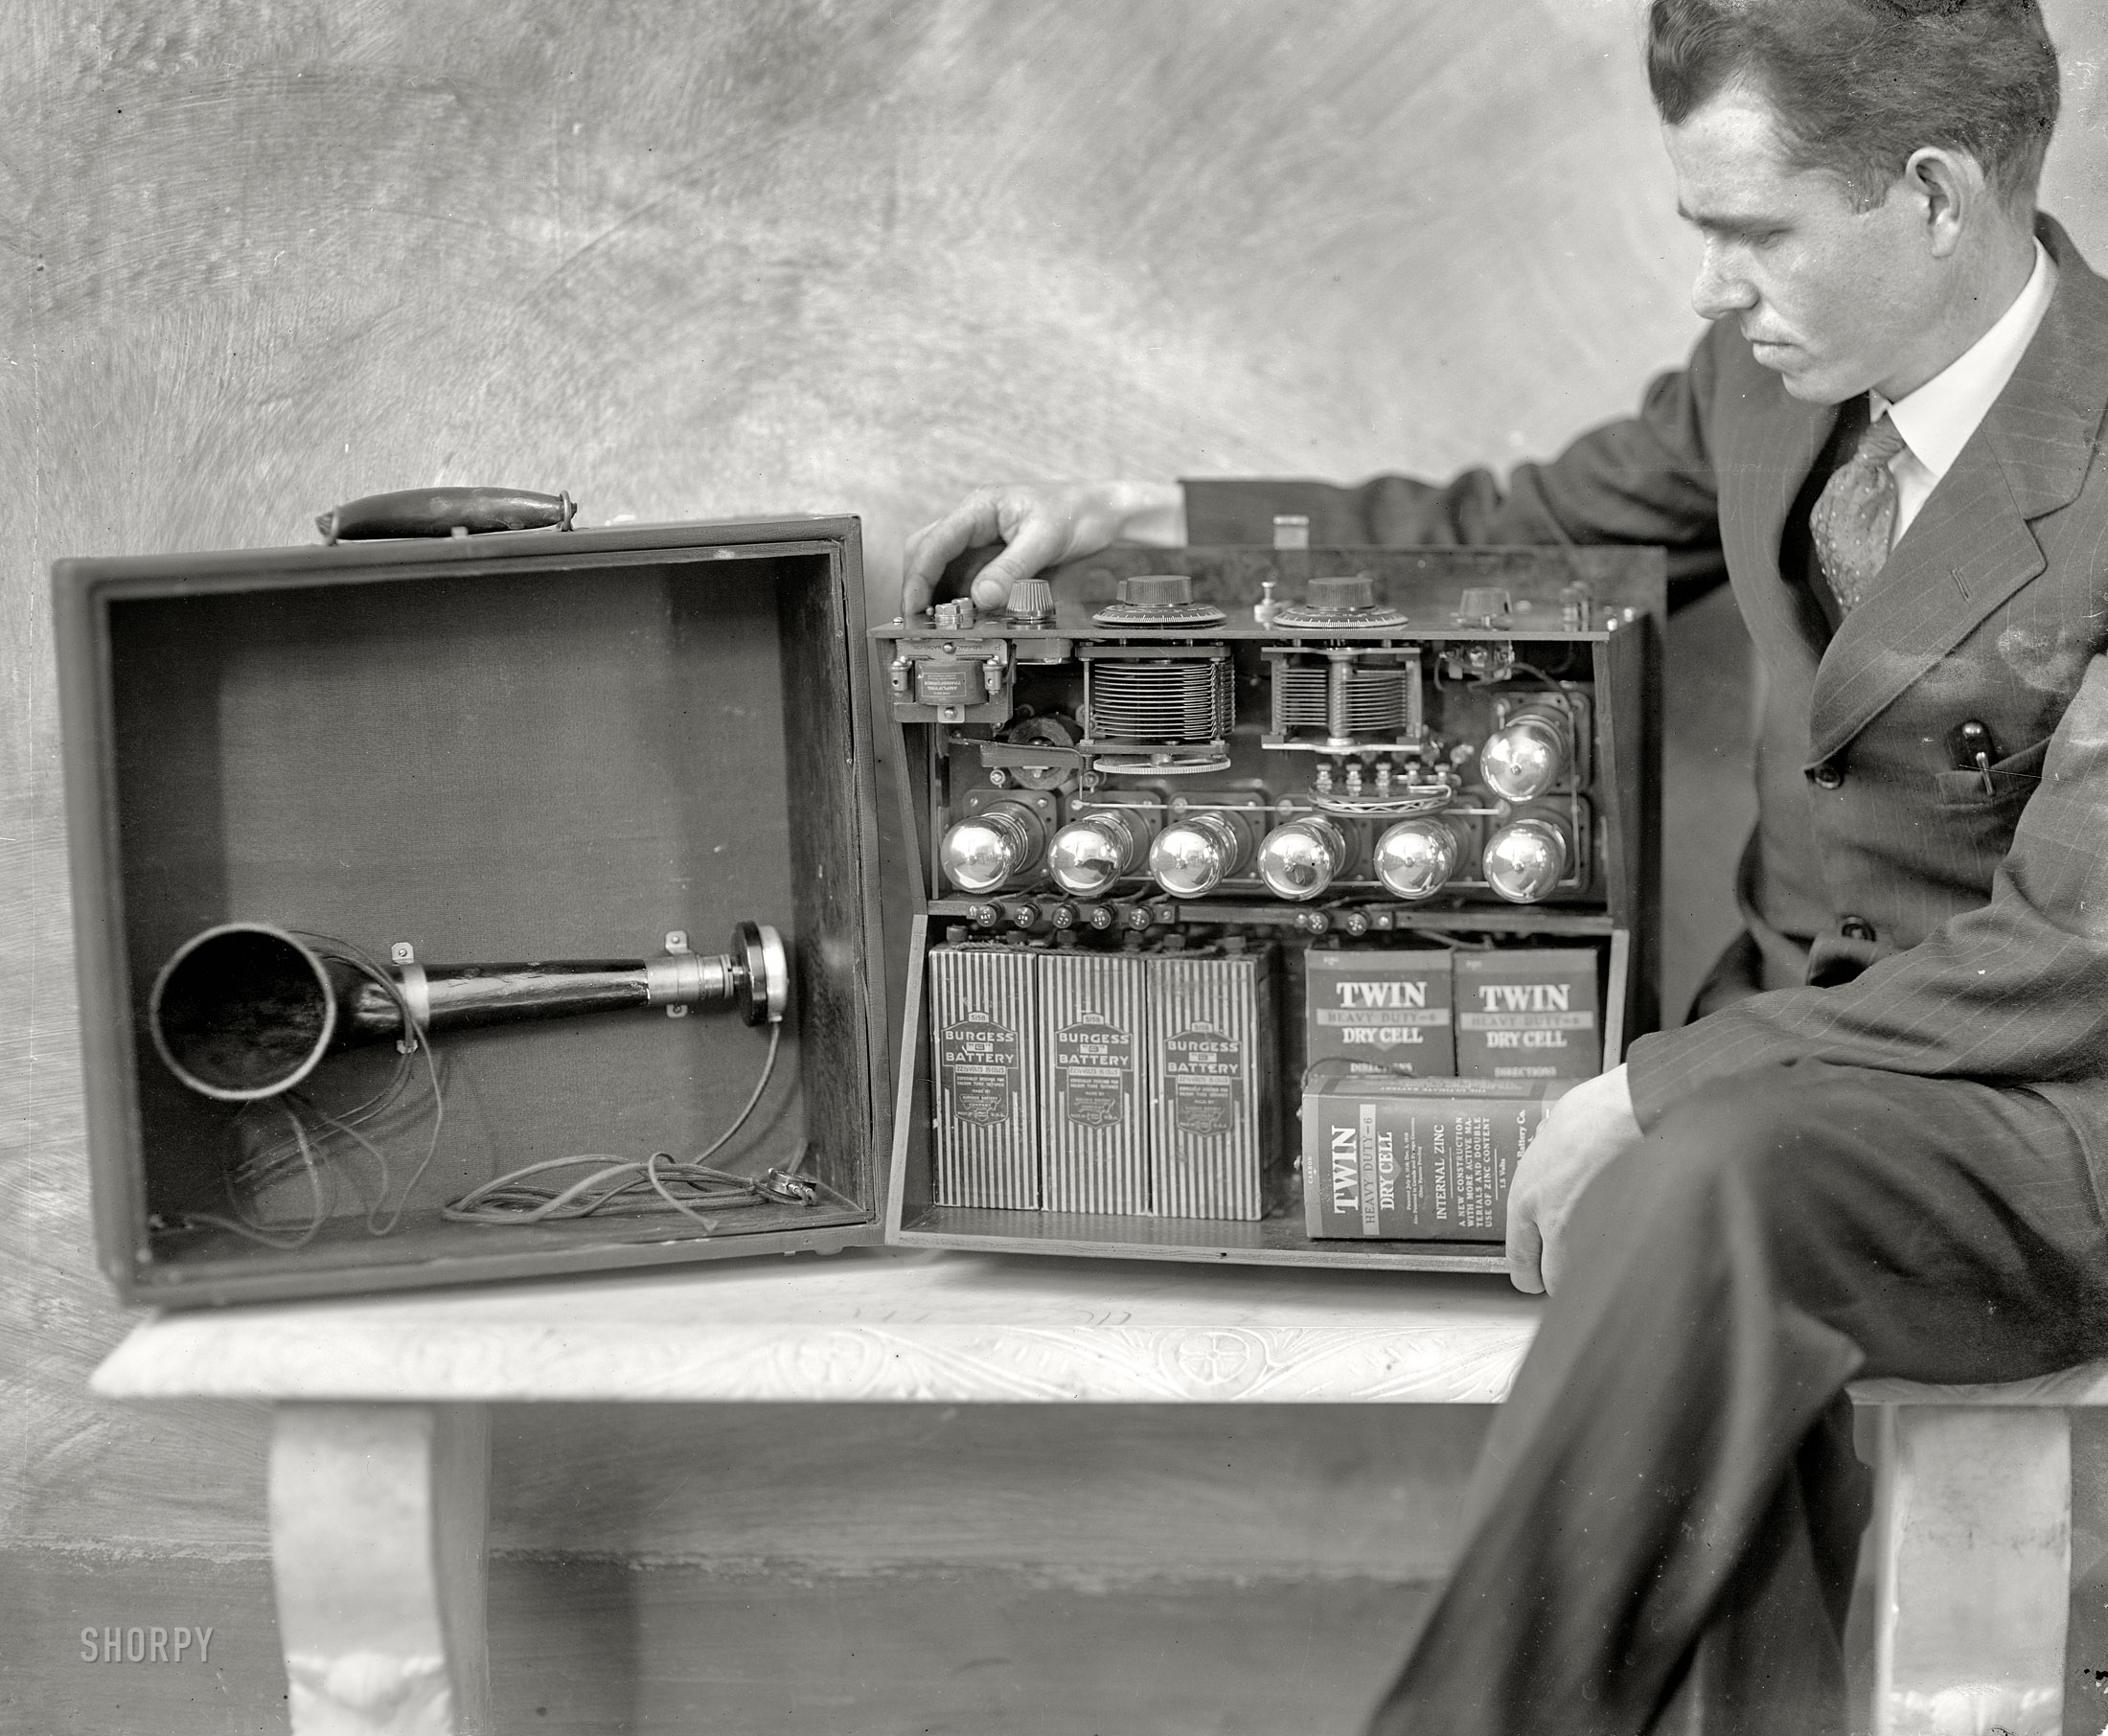 Washington, D.C., circa 1924. "Brent Daniel, formerly of the Radio Laboratory of the Bureau of Standards at Washington, with the first portable Super-Heterodyne, his own design. The seven vacuum tubes, batteries, loop antenna, loudspeaker and other necessary units are completely self-contained in the carrying case. He has been able to hear Pacific Coast stations from this outfit." View full size.